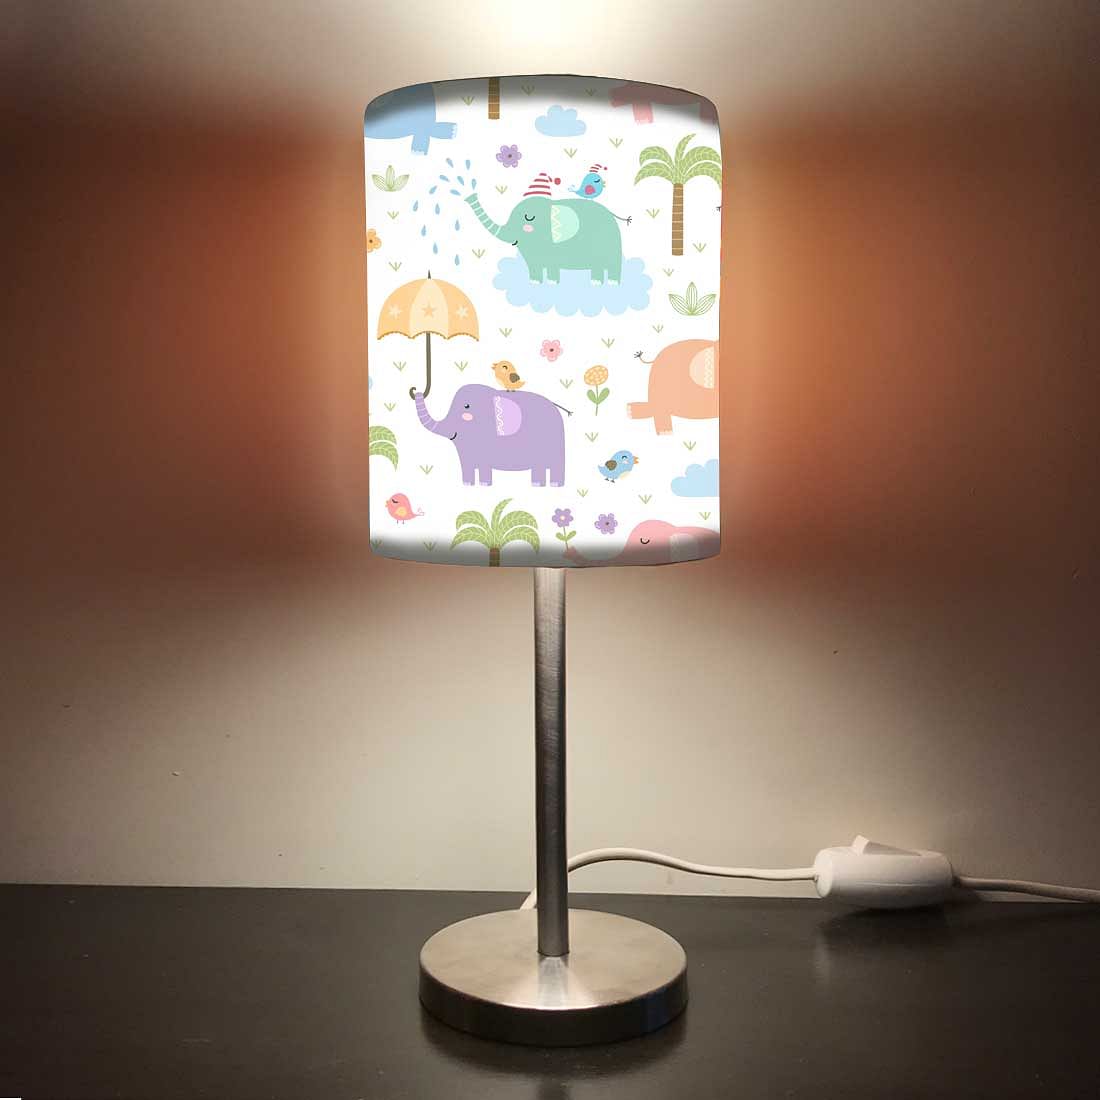 Cute Table Lamps for Child Room - Elephant 0039 Nutcase